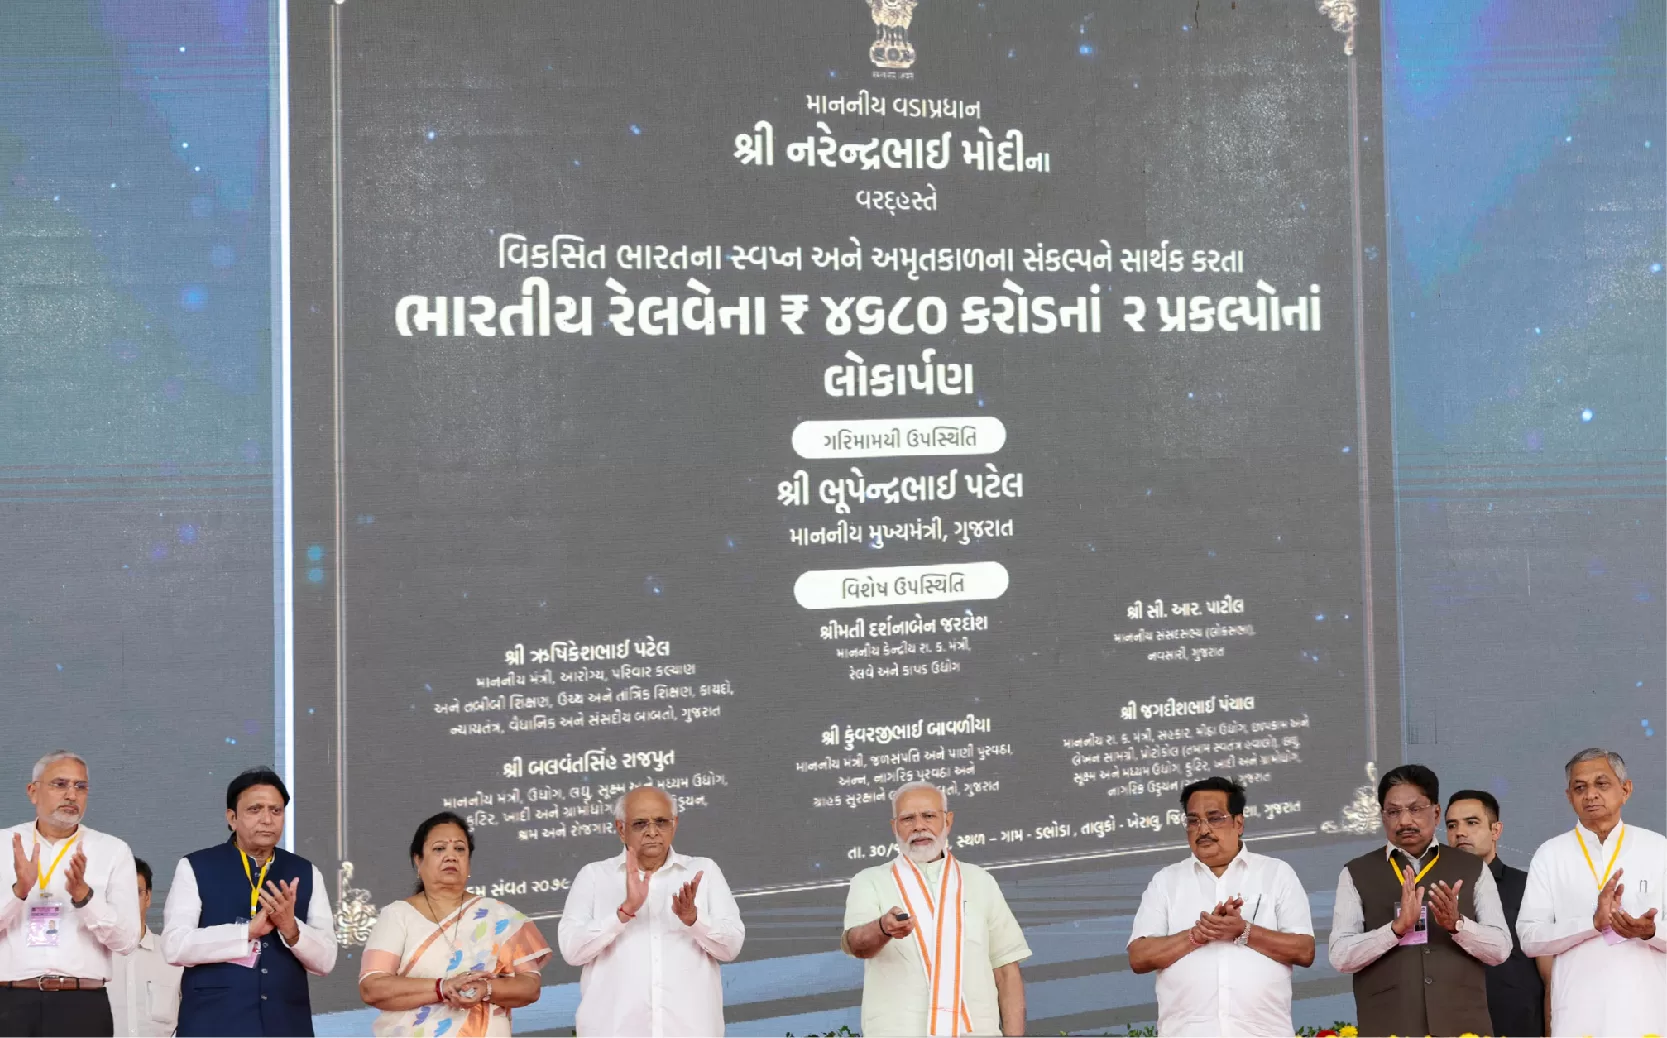 PM Modi holds roadshow in Gujarat, inaugrates projects worth Rs 5,950 crore in Mehsana